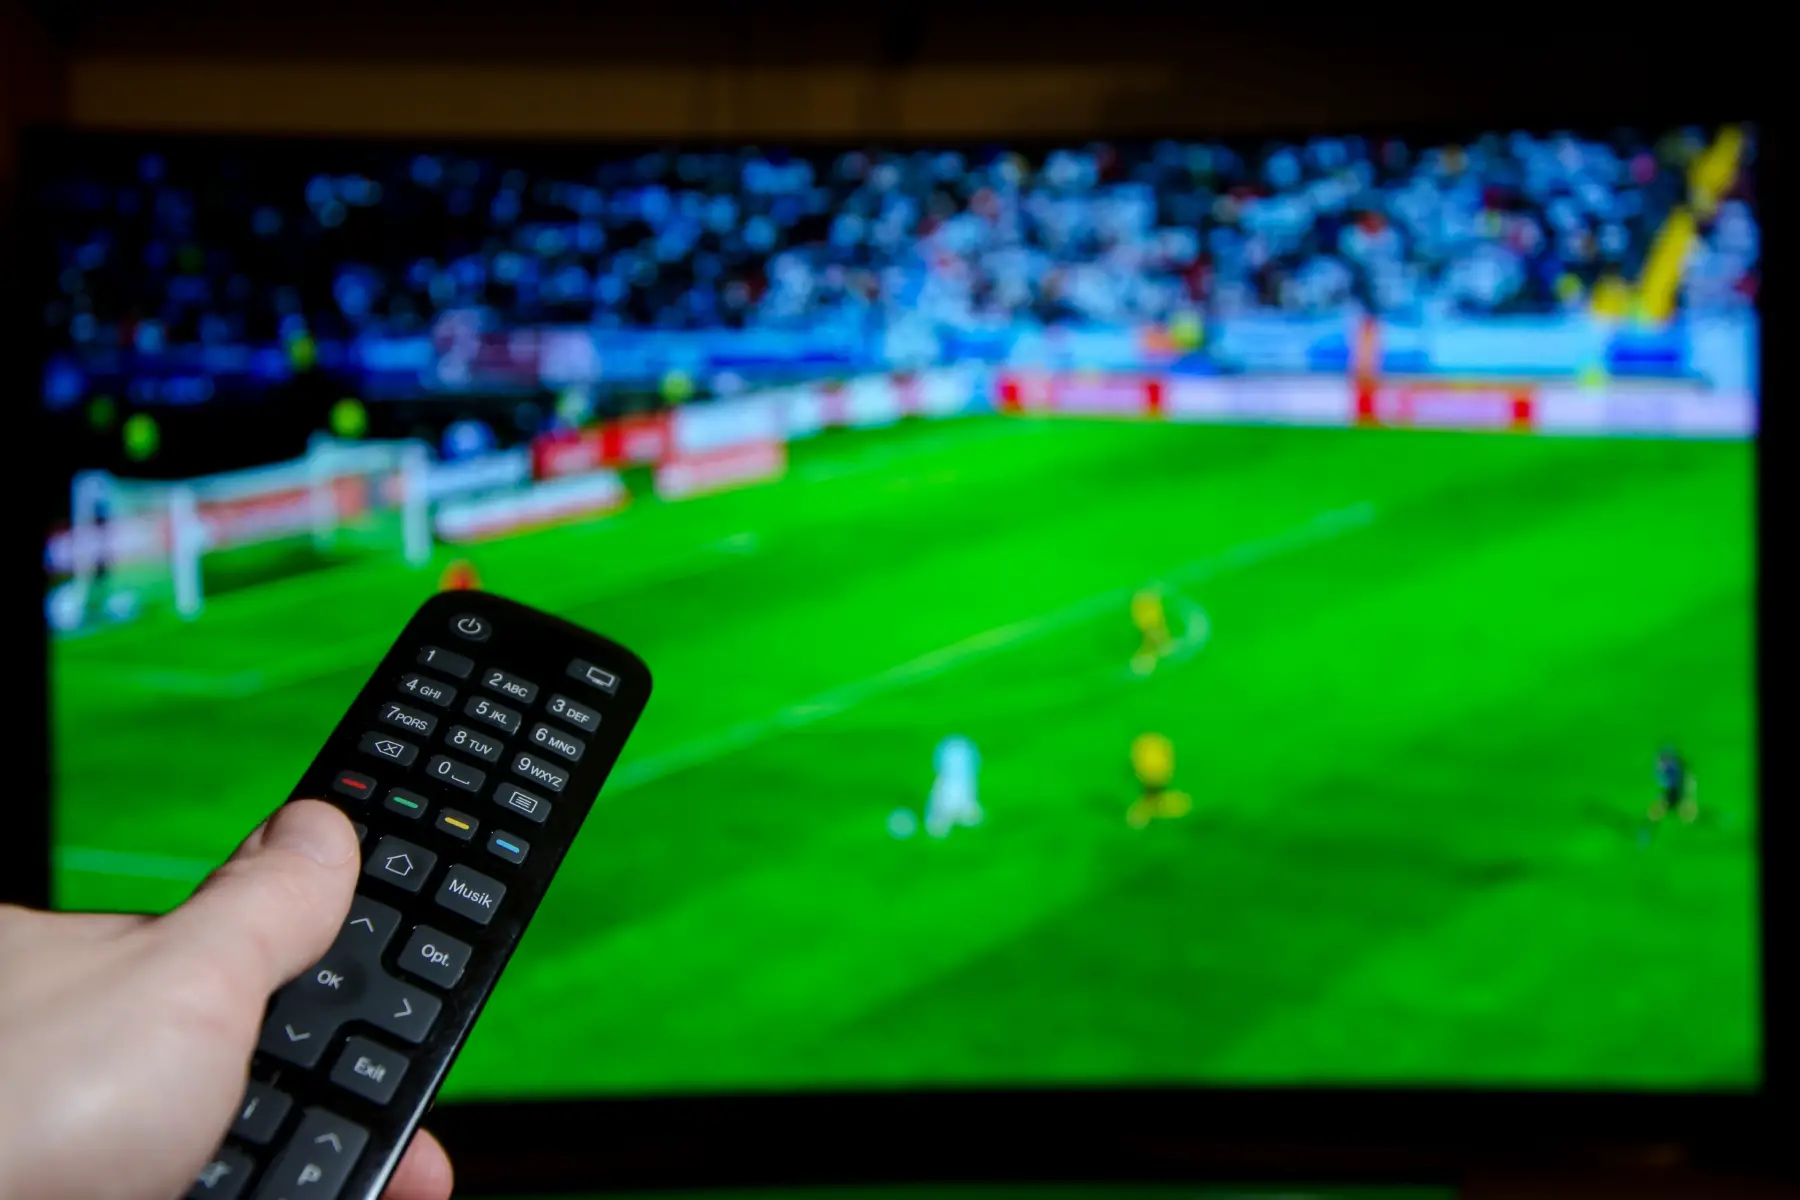 Remote pointing to TV with sports